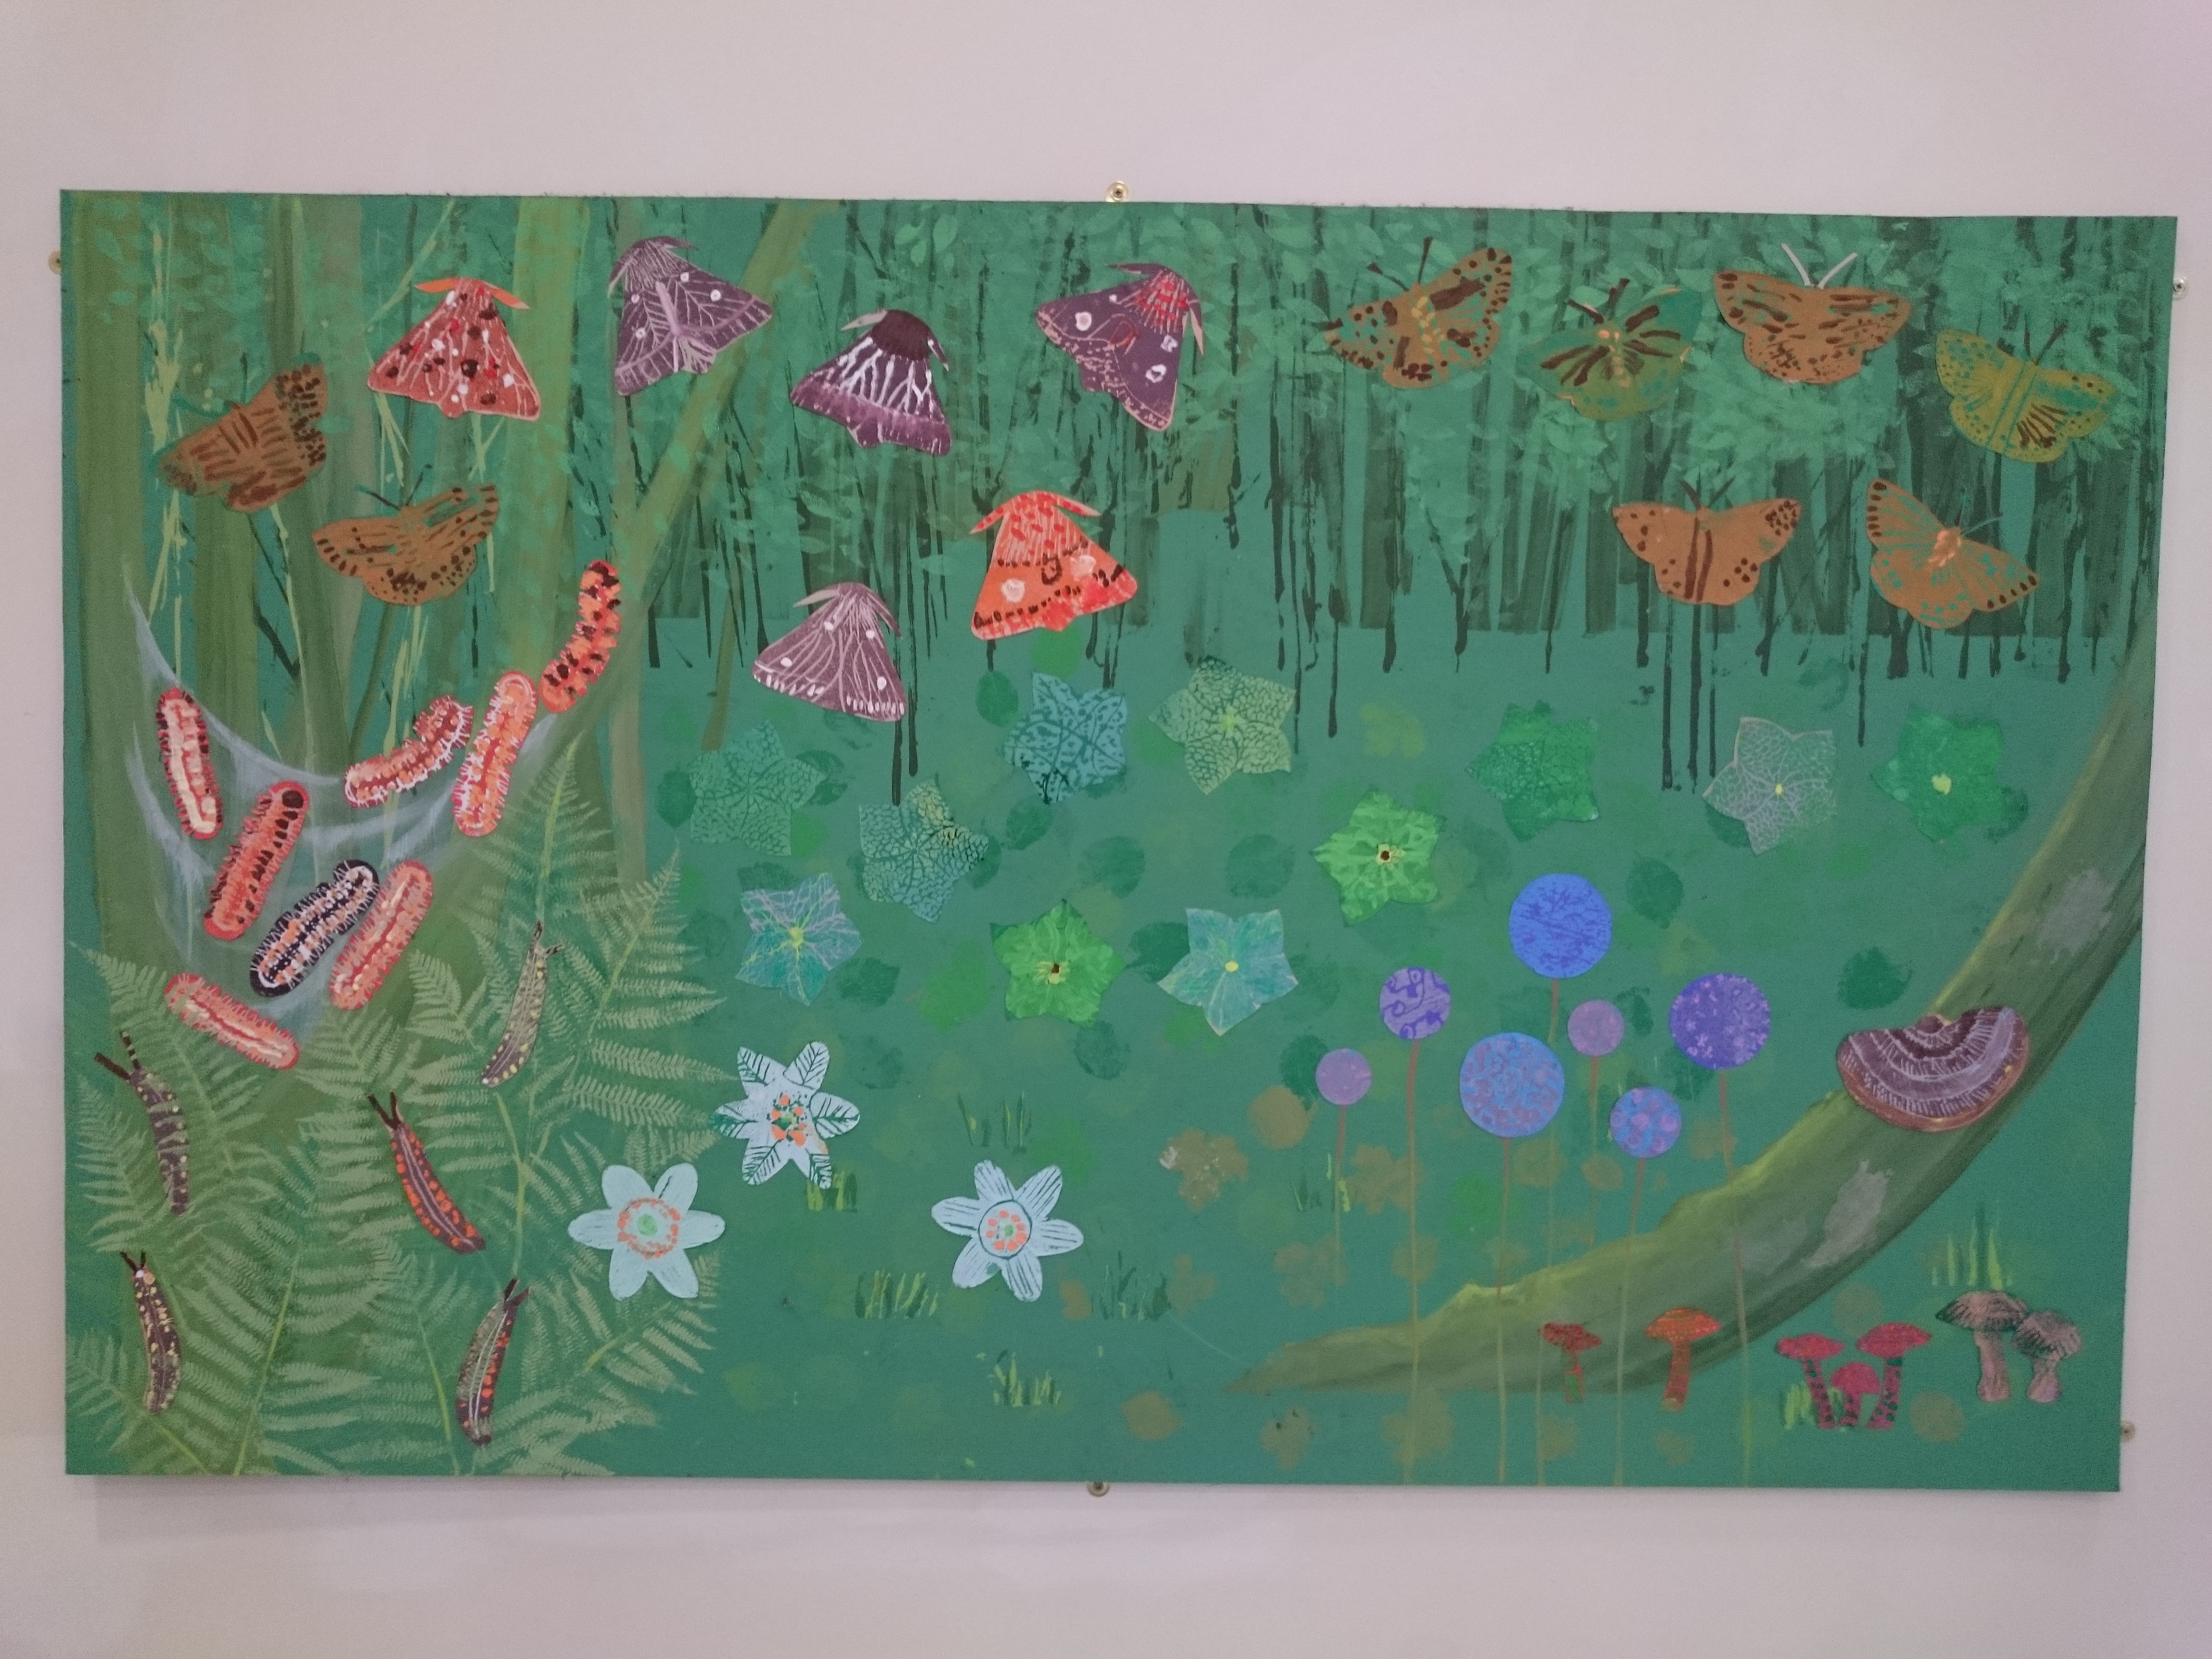 Colourful collage artwork created by children. Inspired by natural habitats